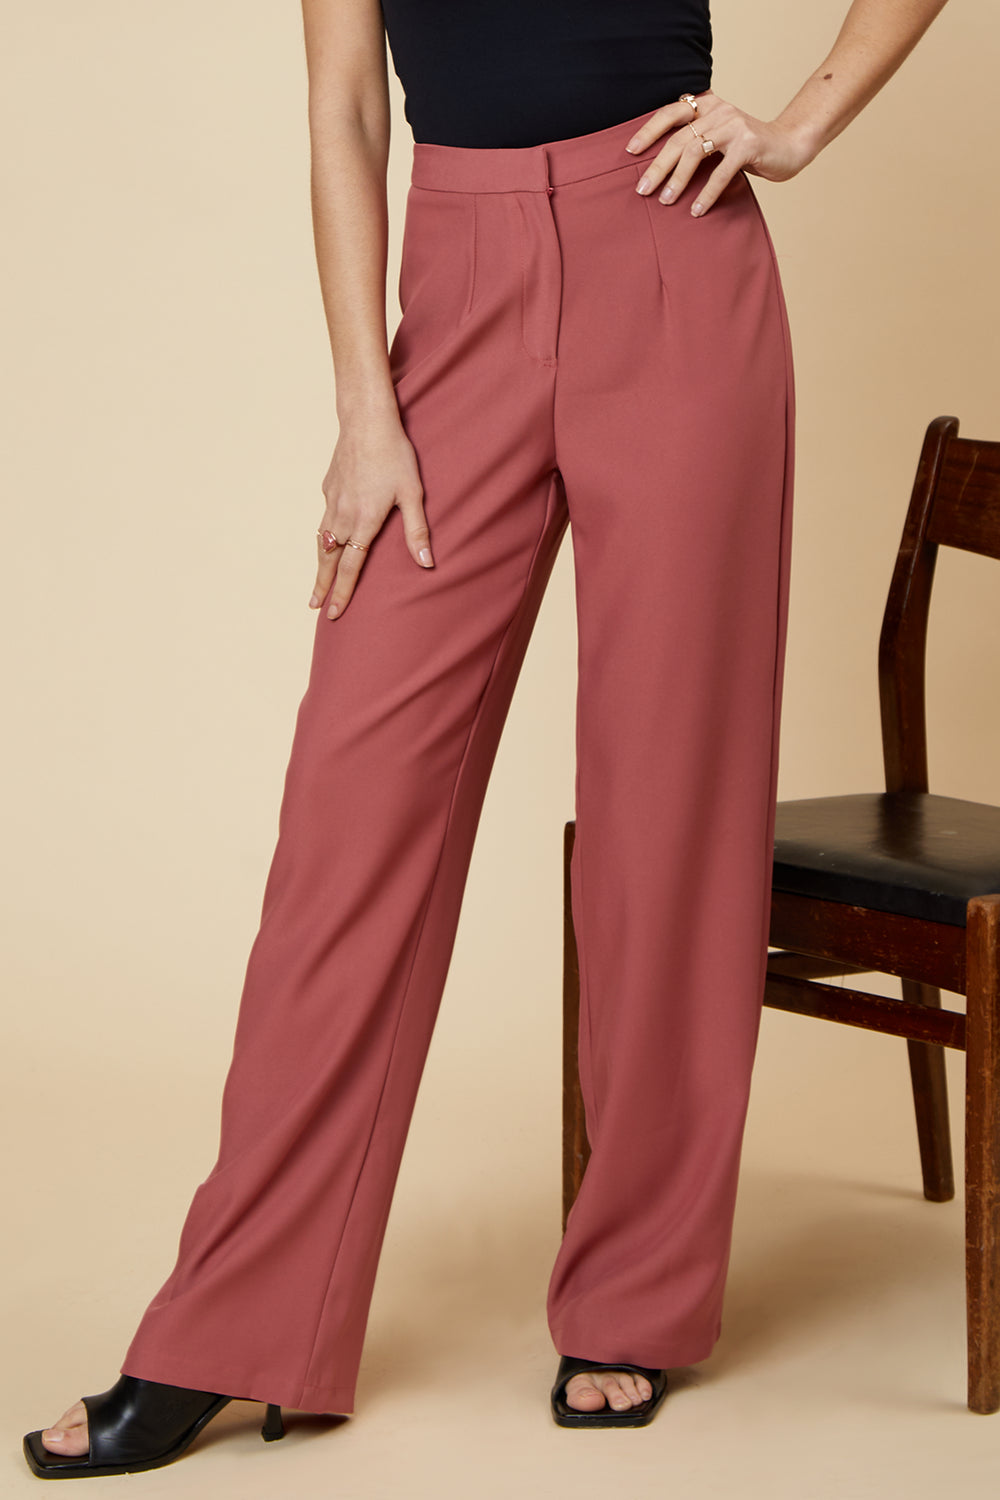 UNIQUE21 Blusher Wide Leg Tailored Trouser Modest Ankle-Length High-Waist Loose Pants For Women With Hidden Front Zipper